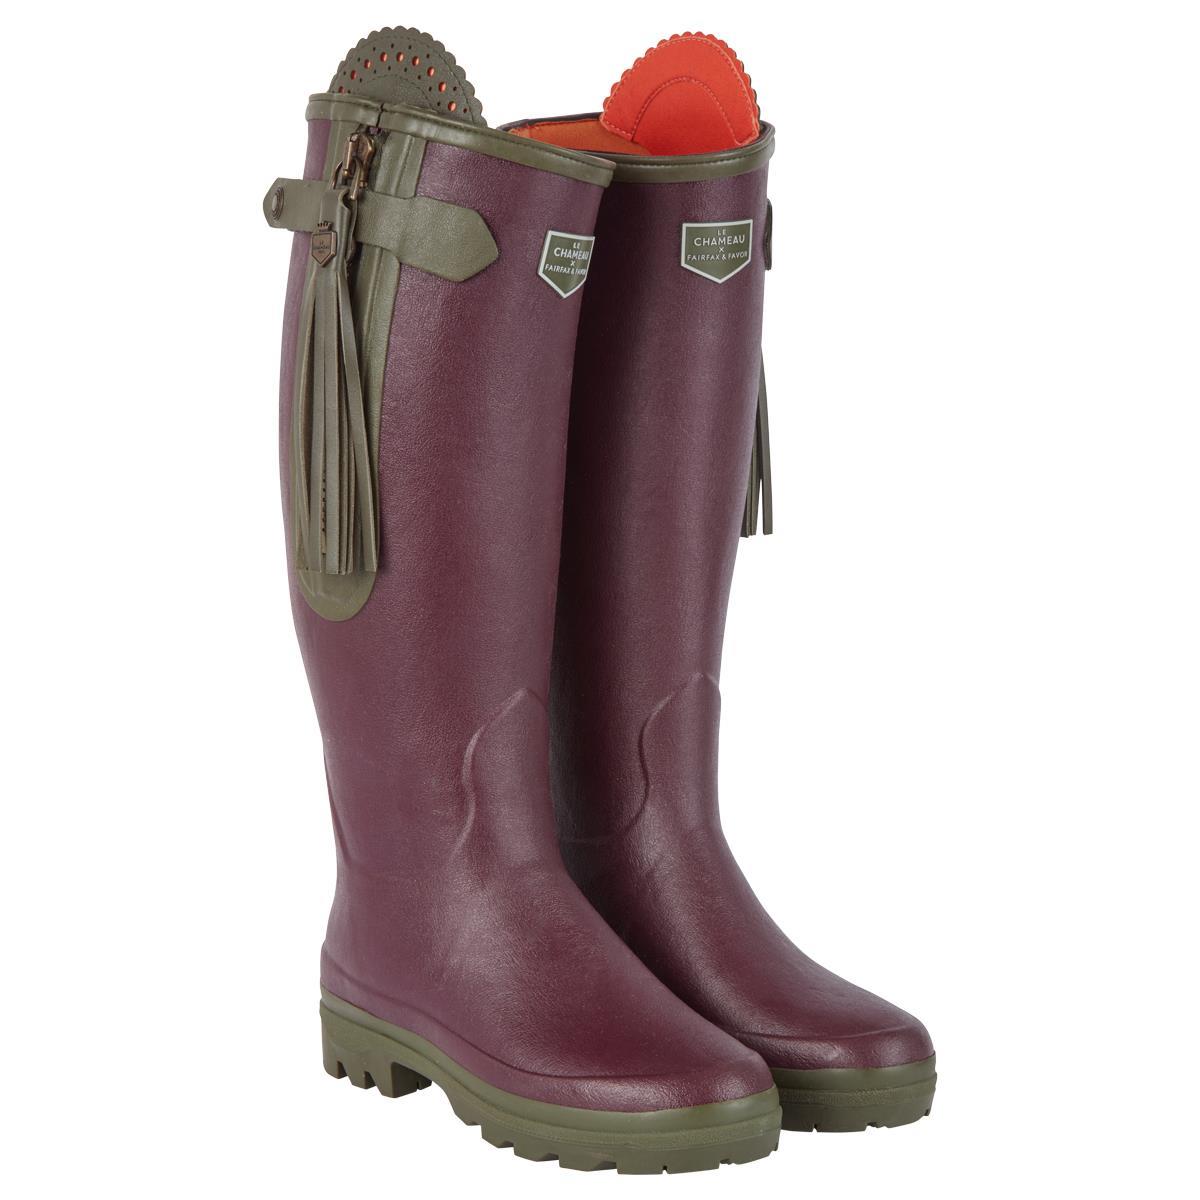 What are the reference number and color options for the Fairfax and Favor wellies?